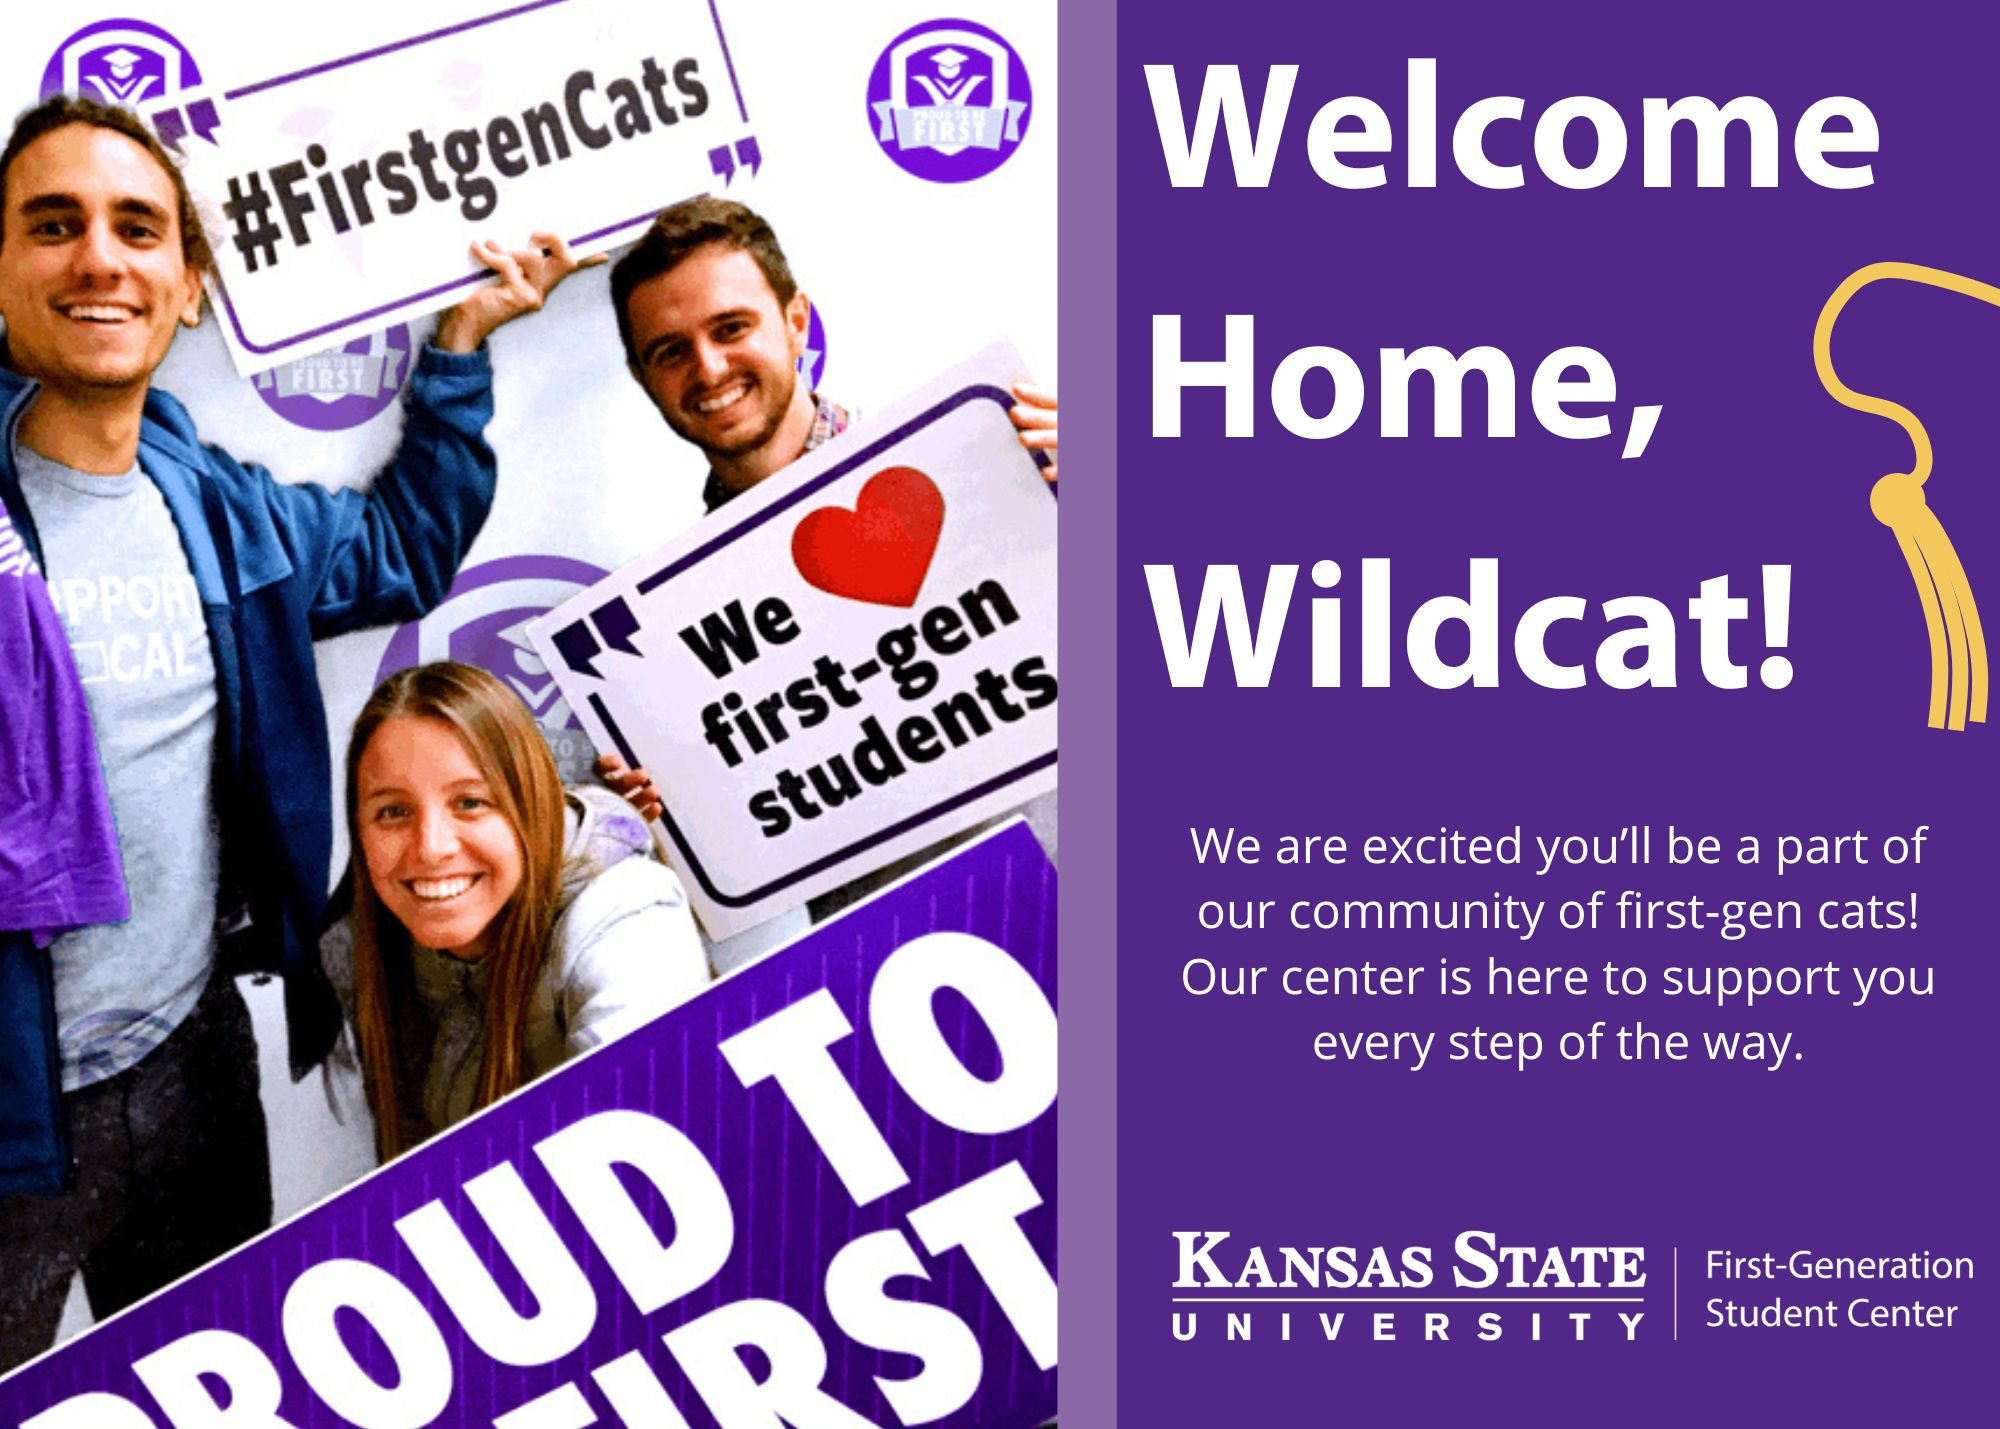 Image of students holding first-generation signs welcoming vistors to the webpage.